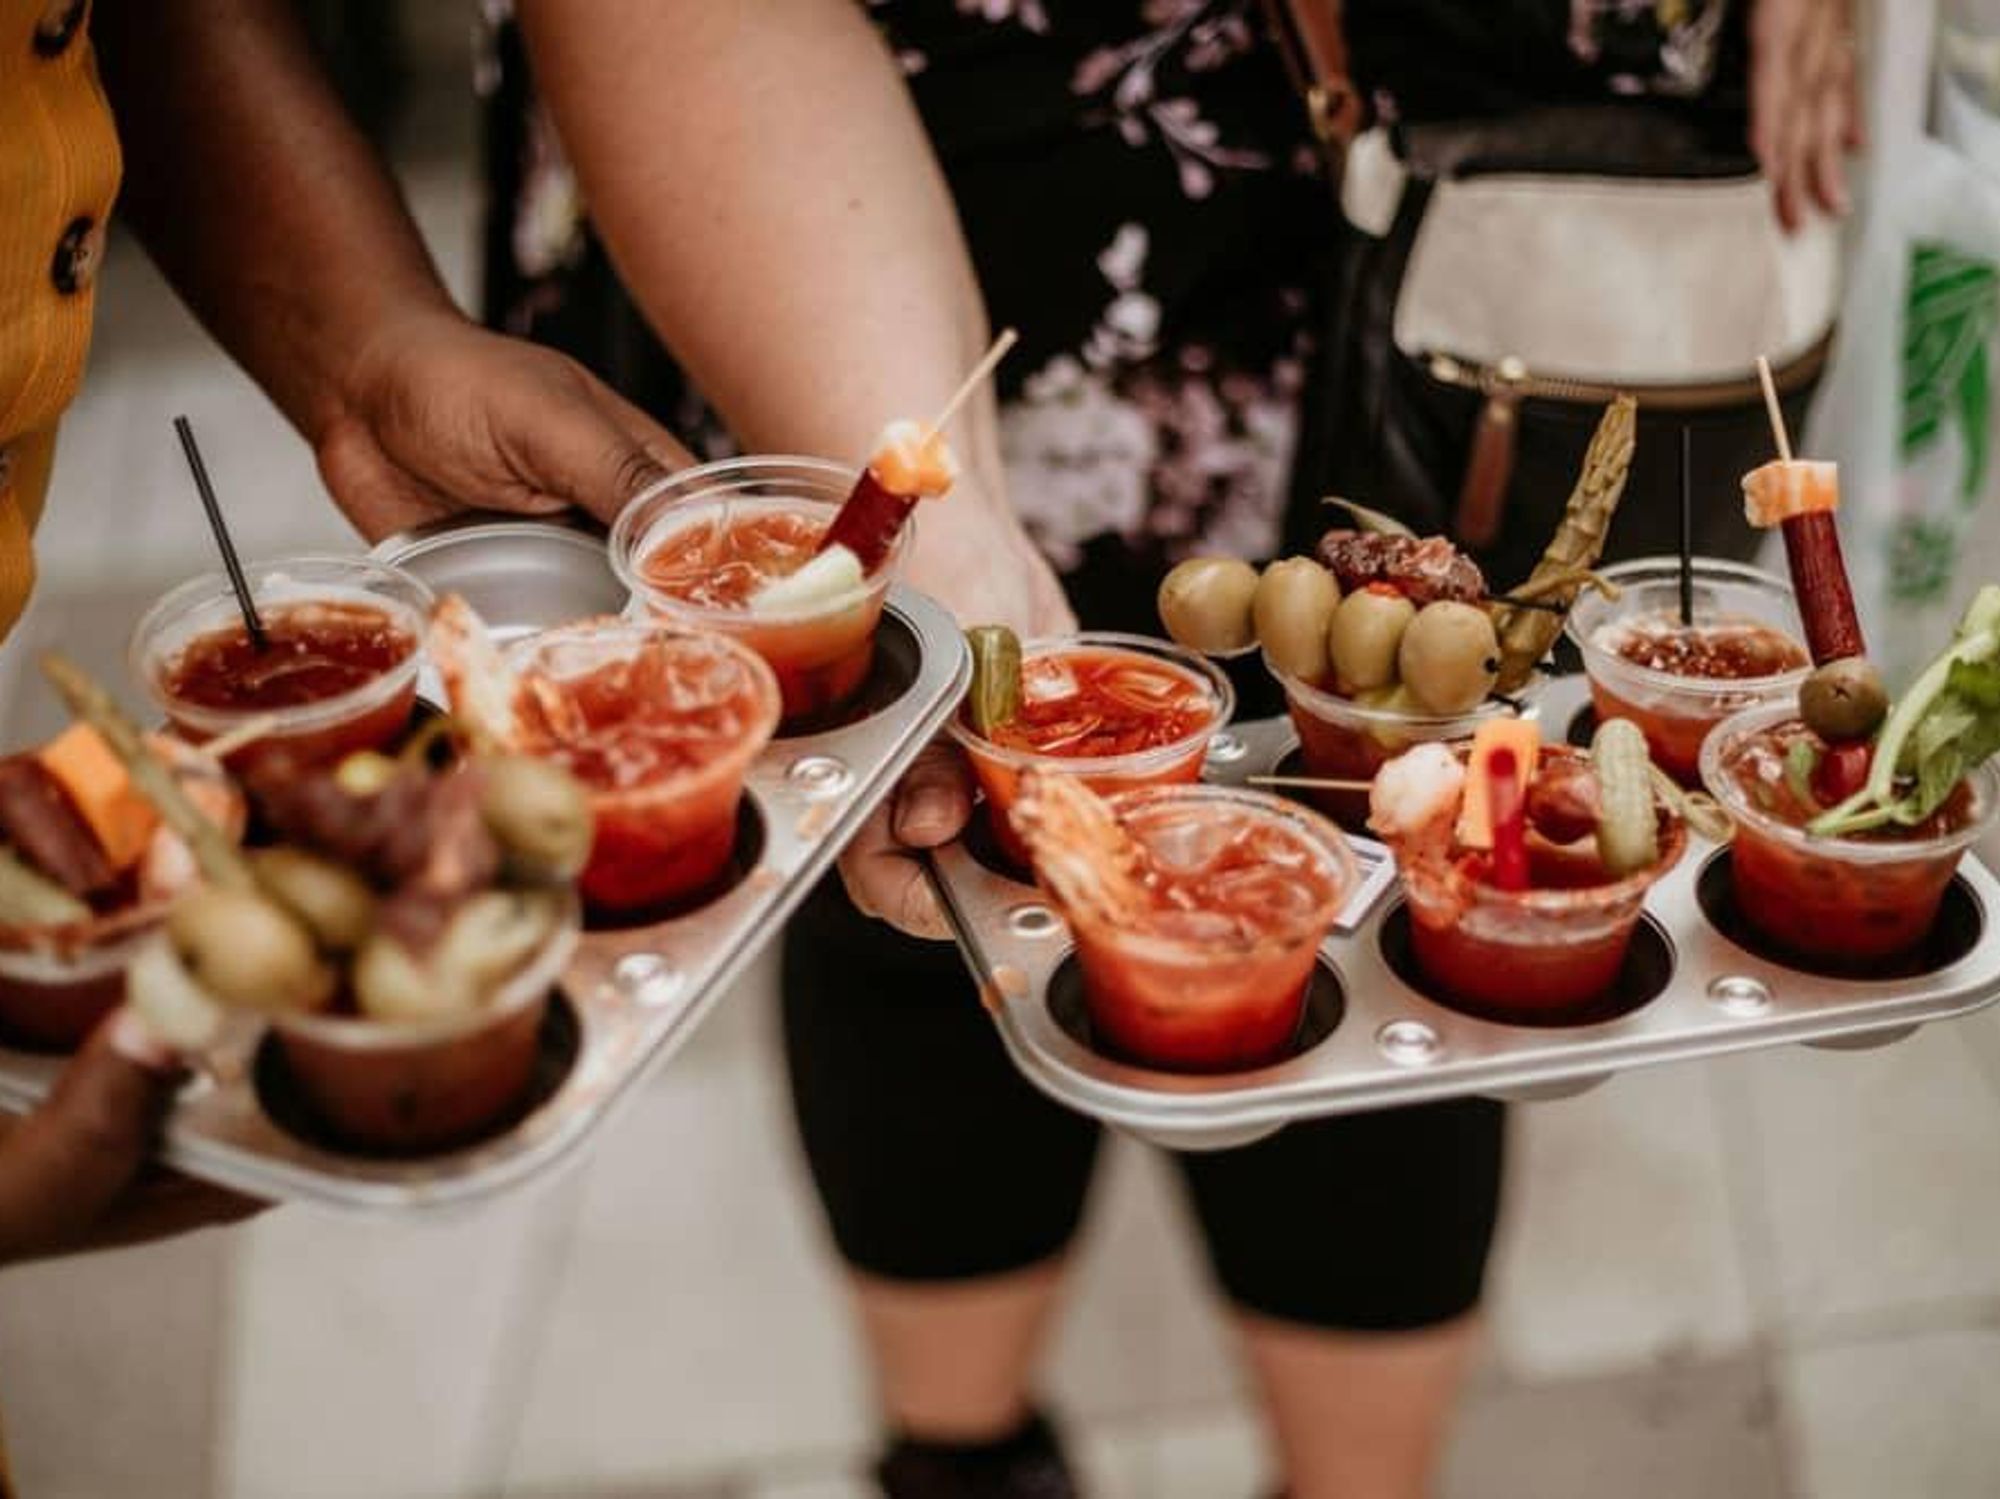 People carry trays of Bloody Mary's with different garnishes